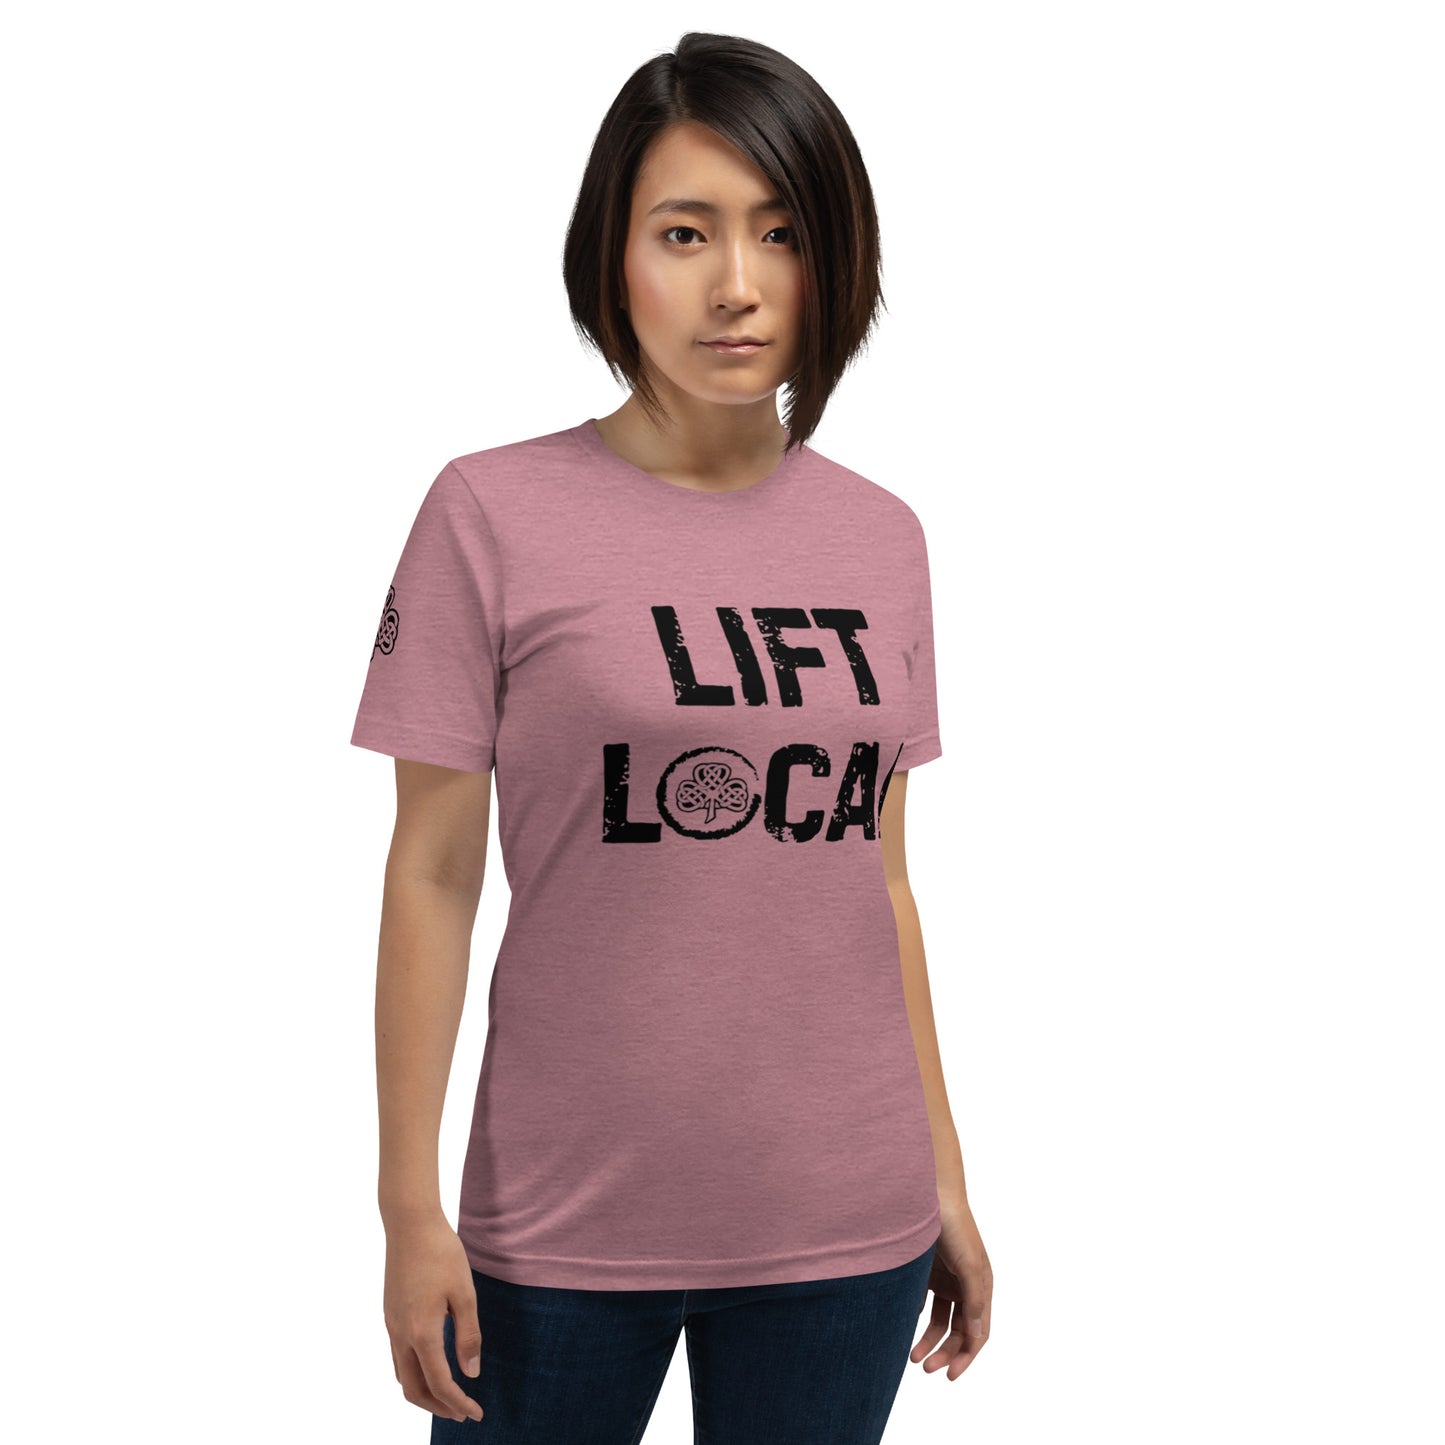 Lift Local - Unisex t-shirt with back and right sleeve